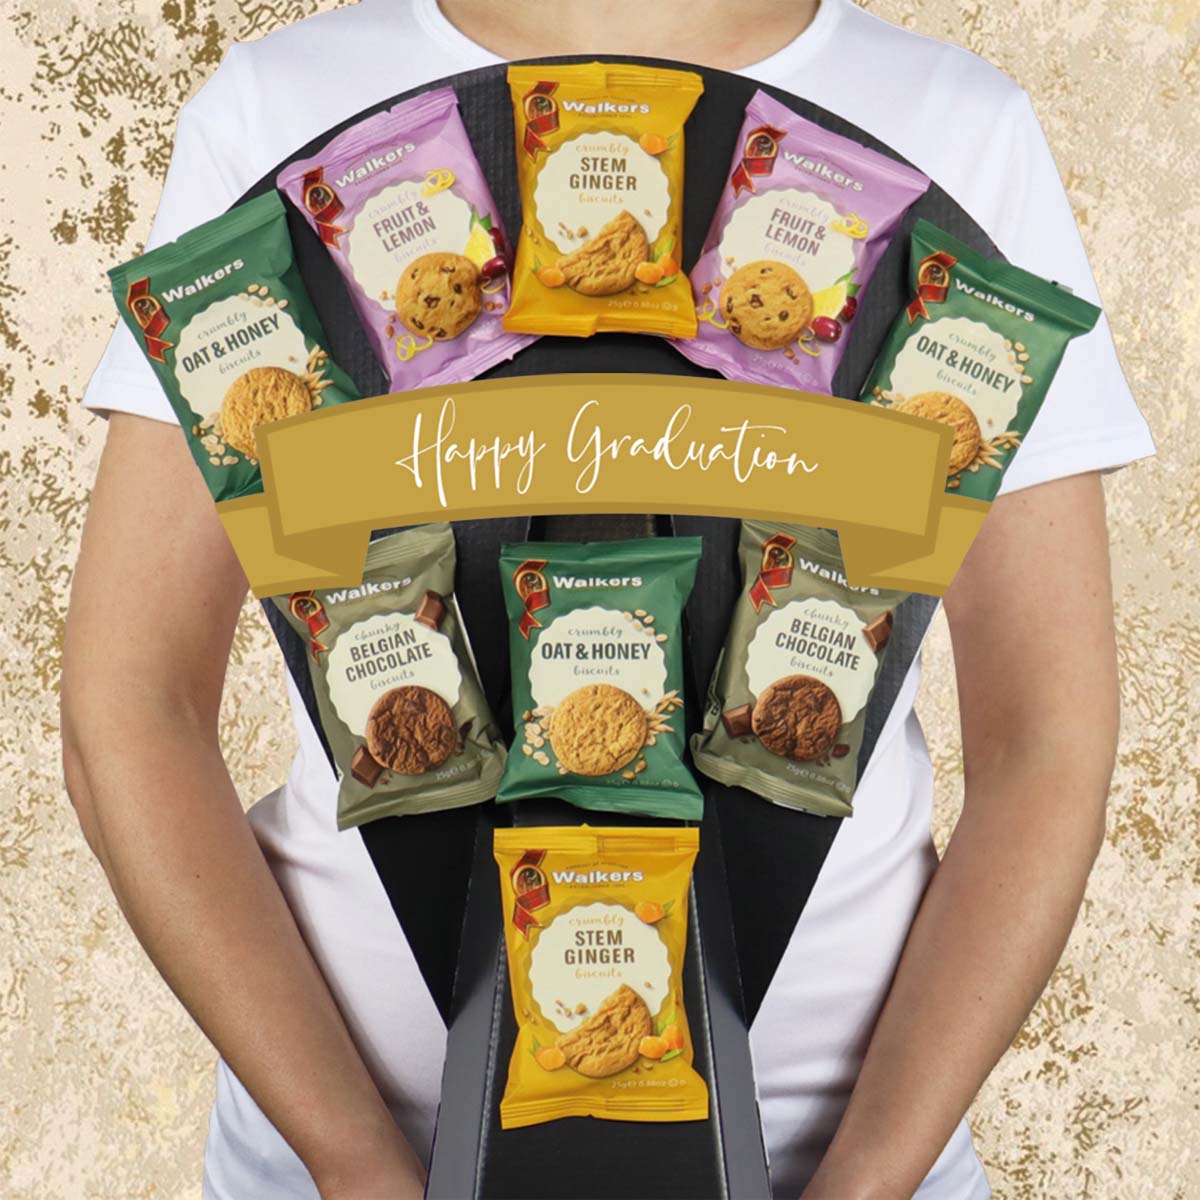 The Border Biscuit Graduation Bouquet with Chocolate Cookies, Butterscotch Crunch and More - Gift Hamper Box by HamperWell